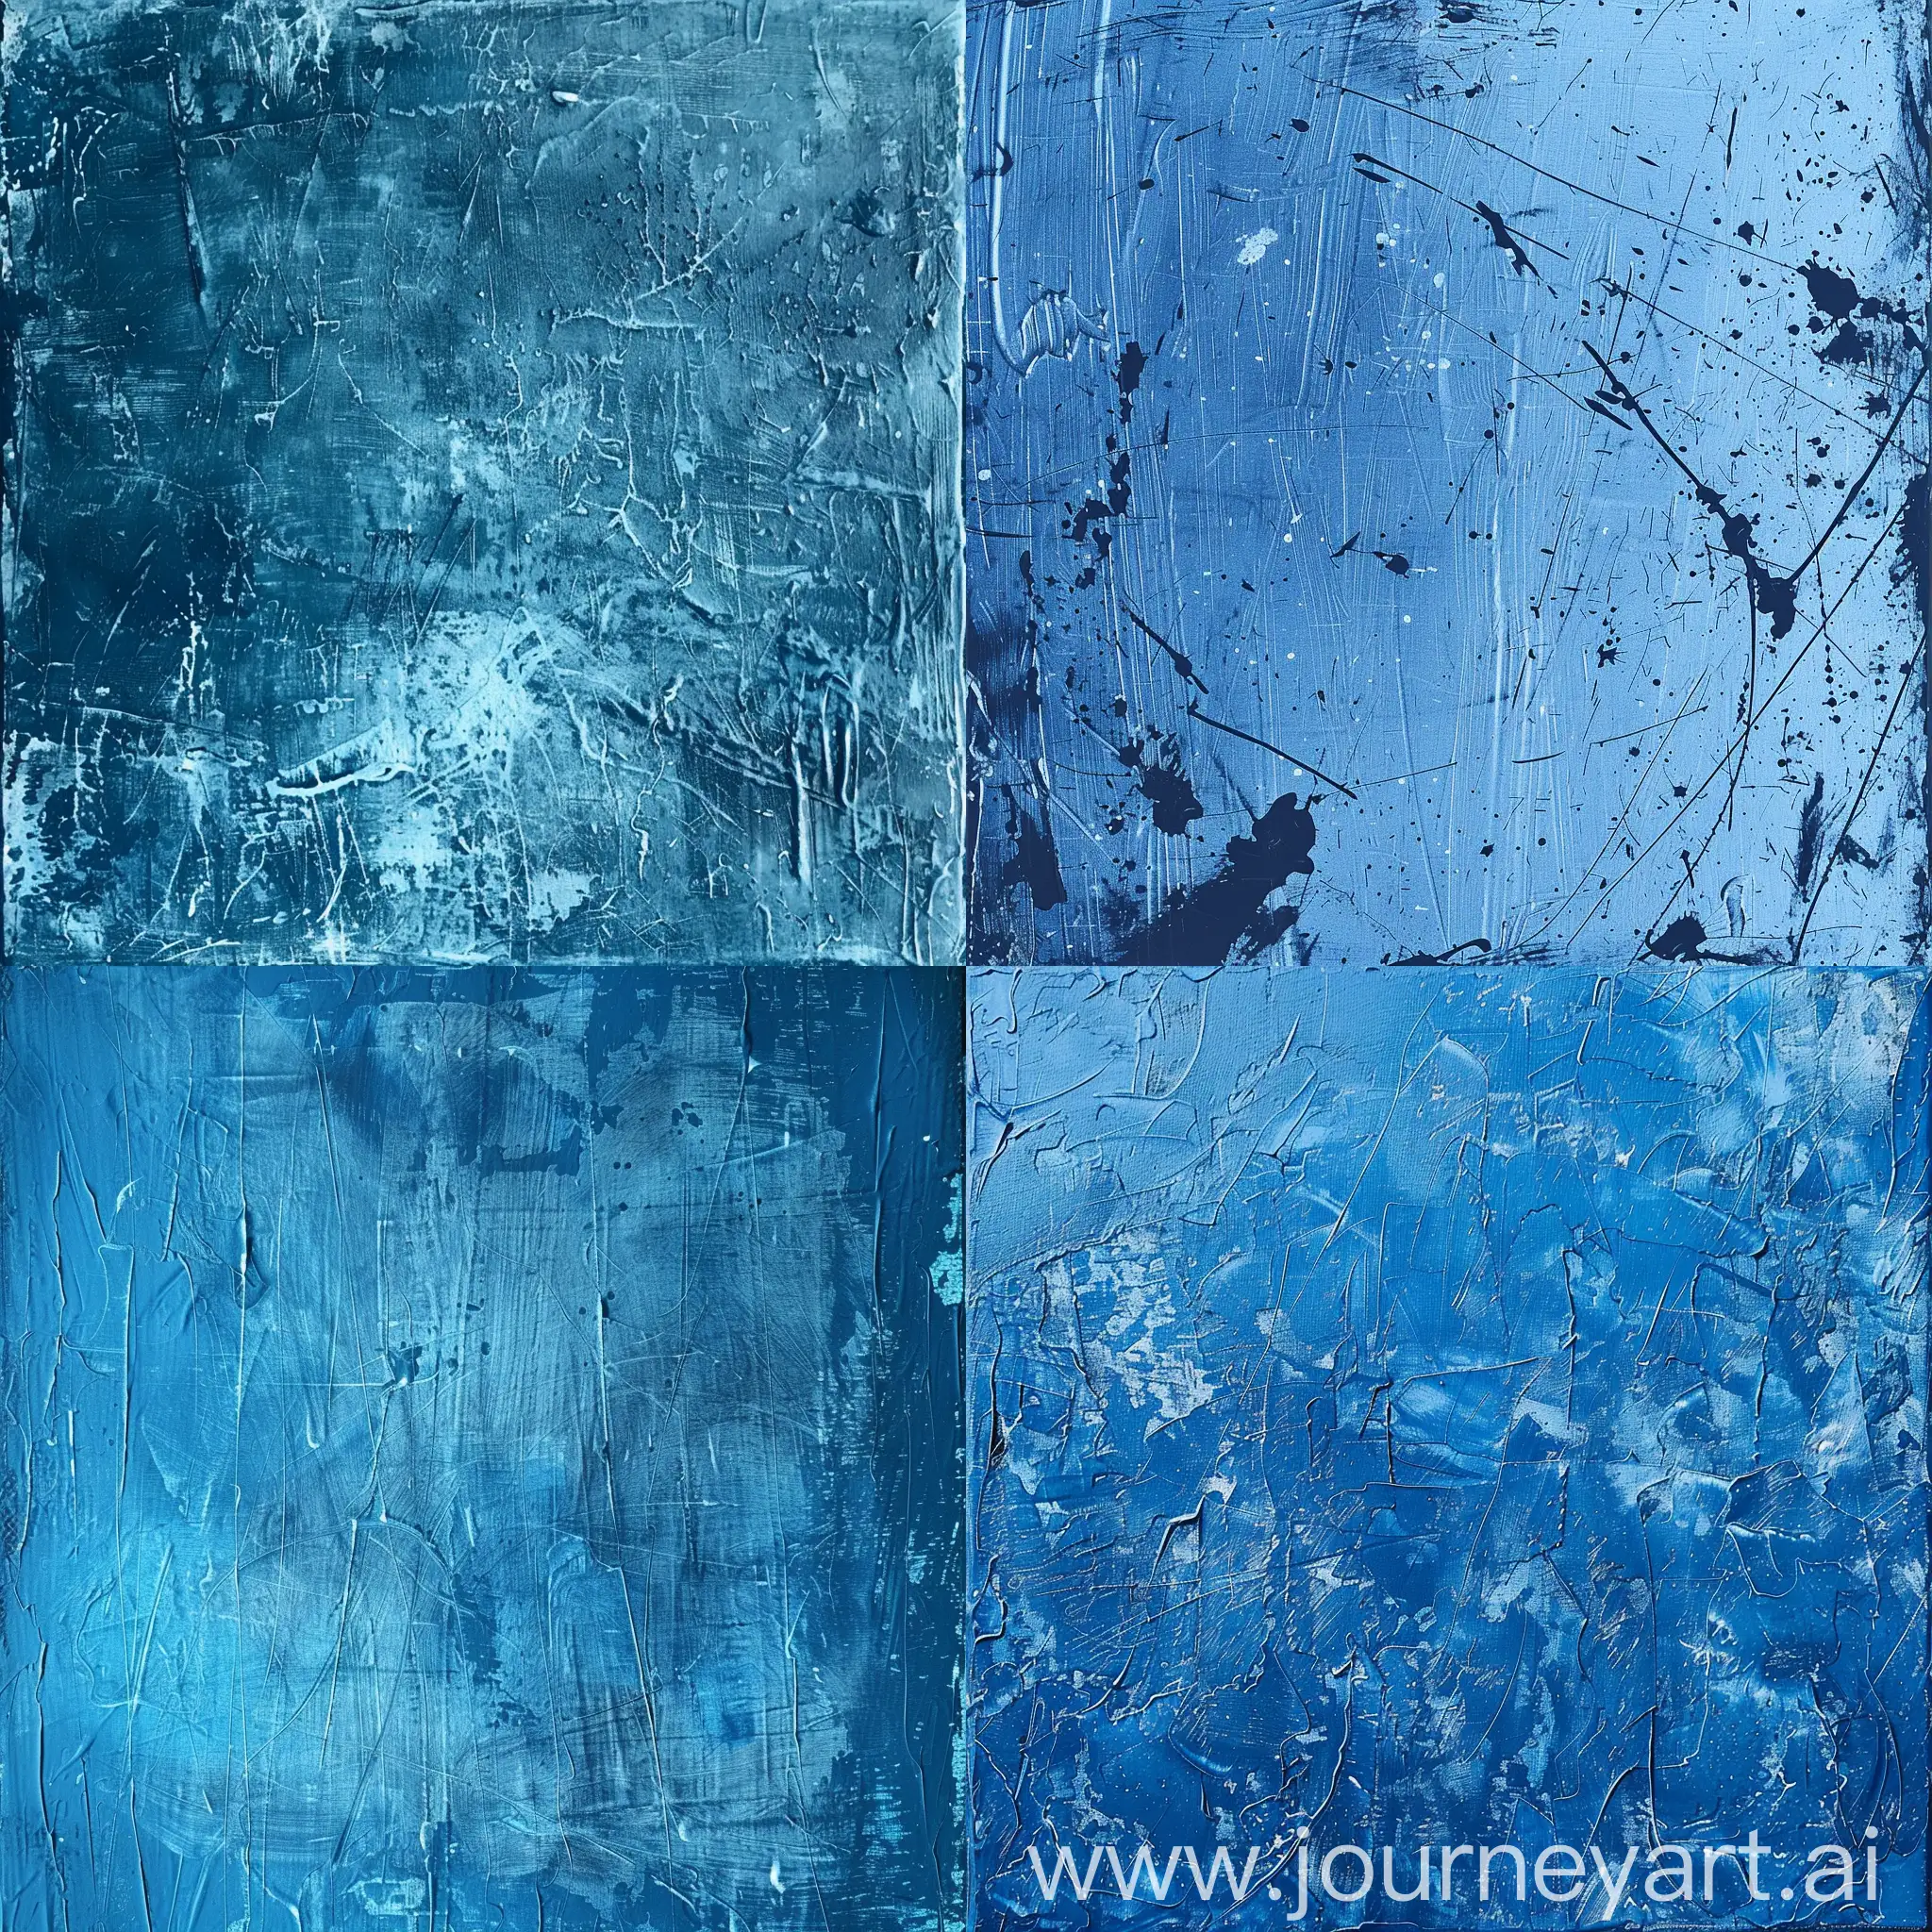 Artistic-Blue-Monochrome-Background-with-Painterly-Scuffs